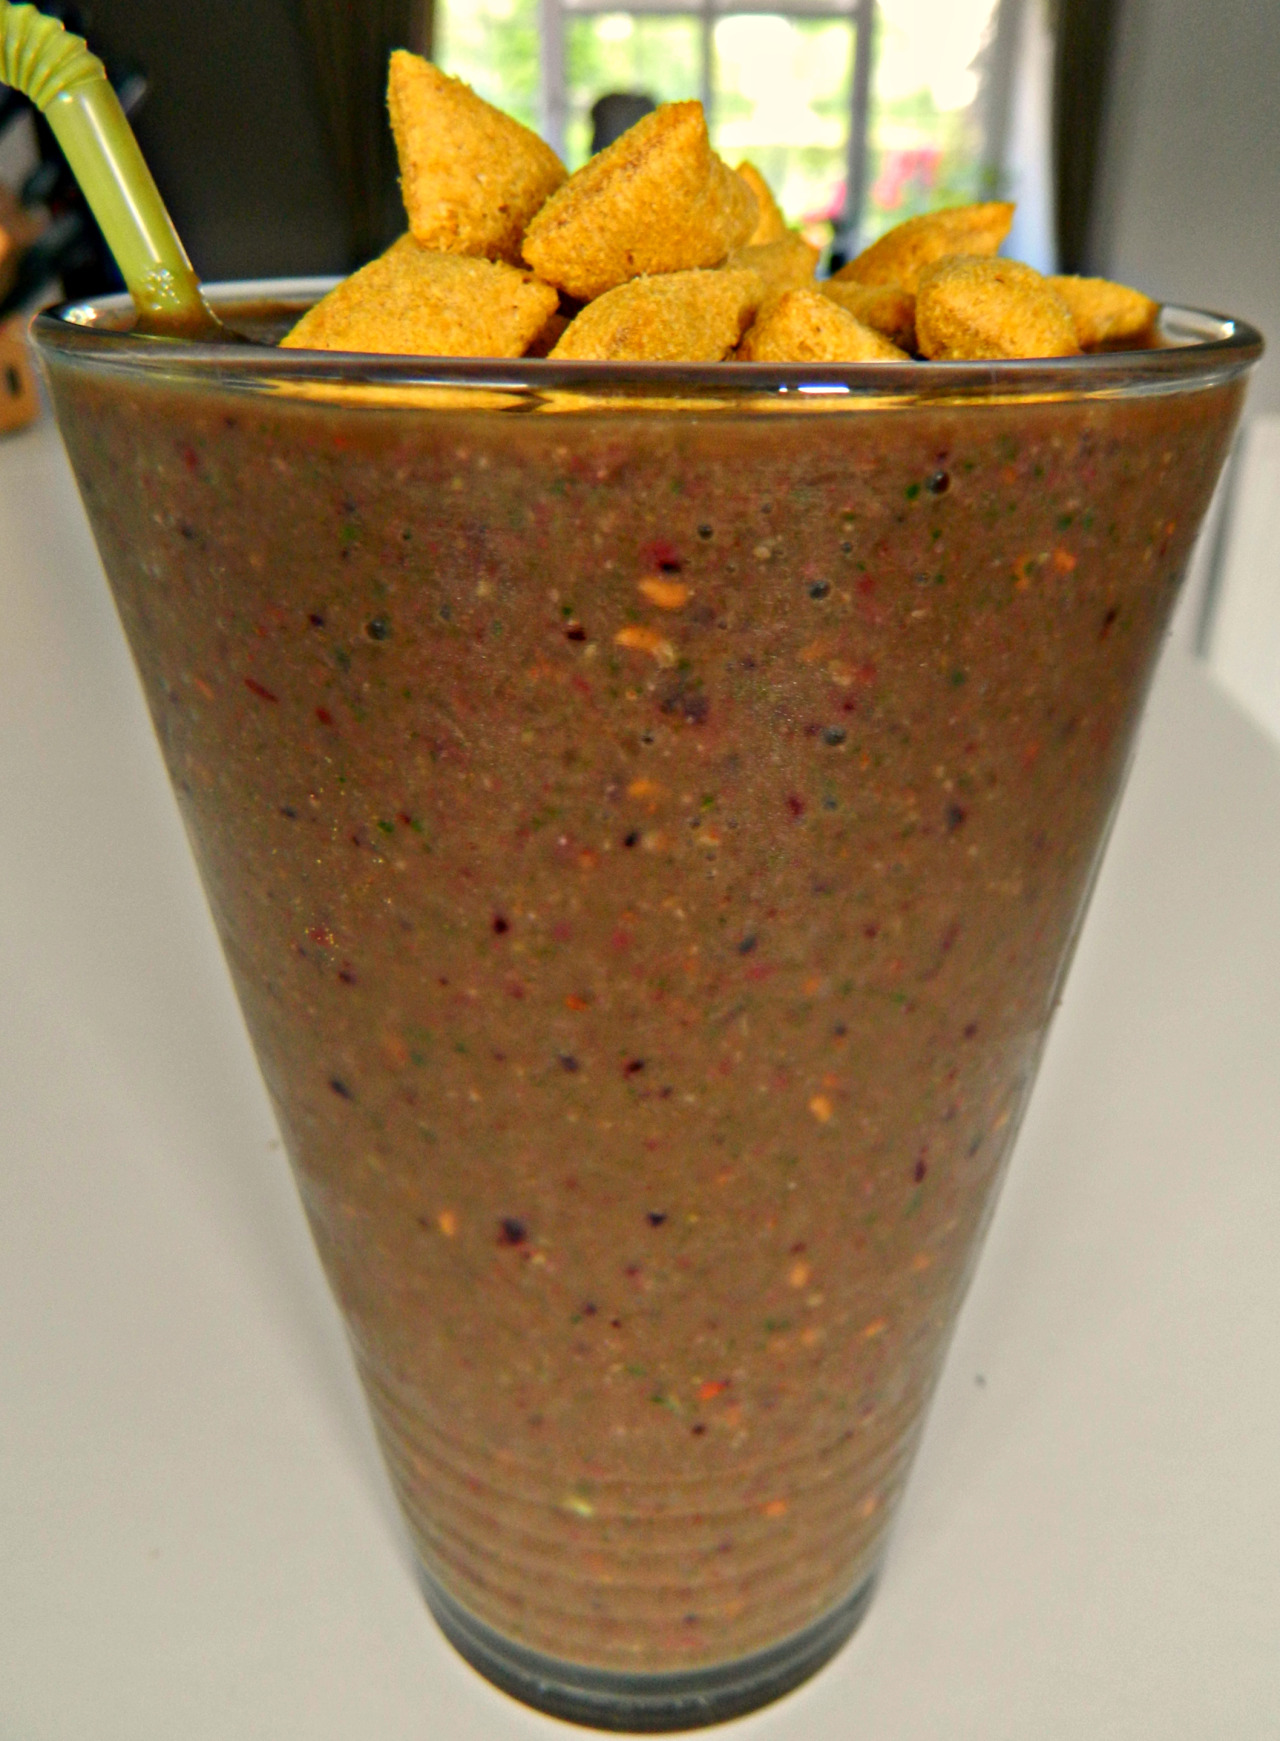 Smoothie Day #…uh, I’ve forgotten how many days I’ve done this now, haha!
Kale, spinach, romaine, cucumber, raspberries, frozen mixed berries, honey, flaxseed and almond milk smoothie topped with chocolate Krave cereal because why not? :D
It’s my...